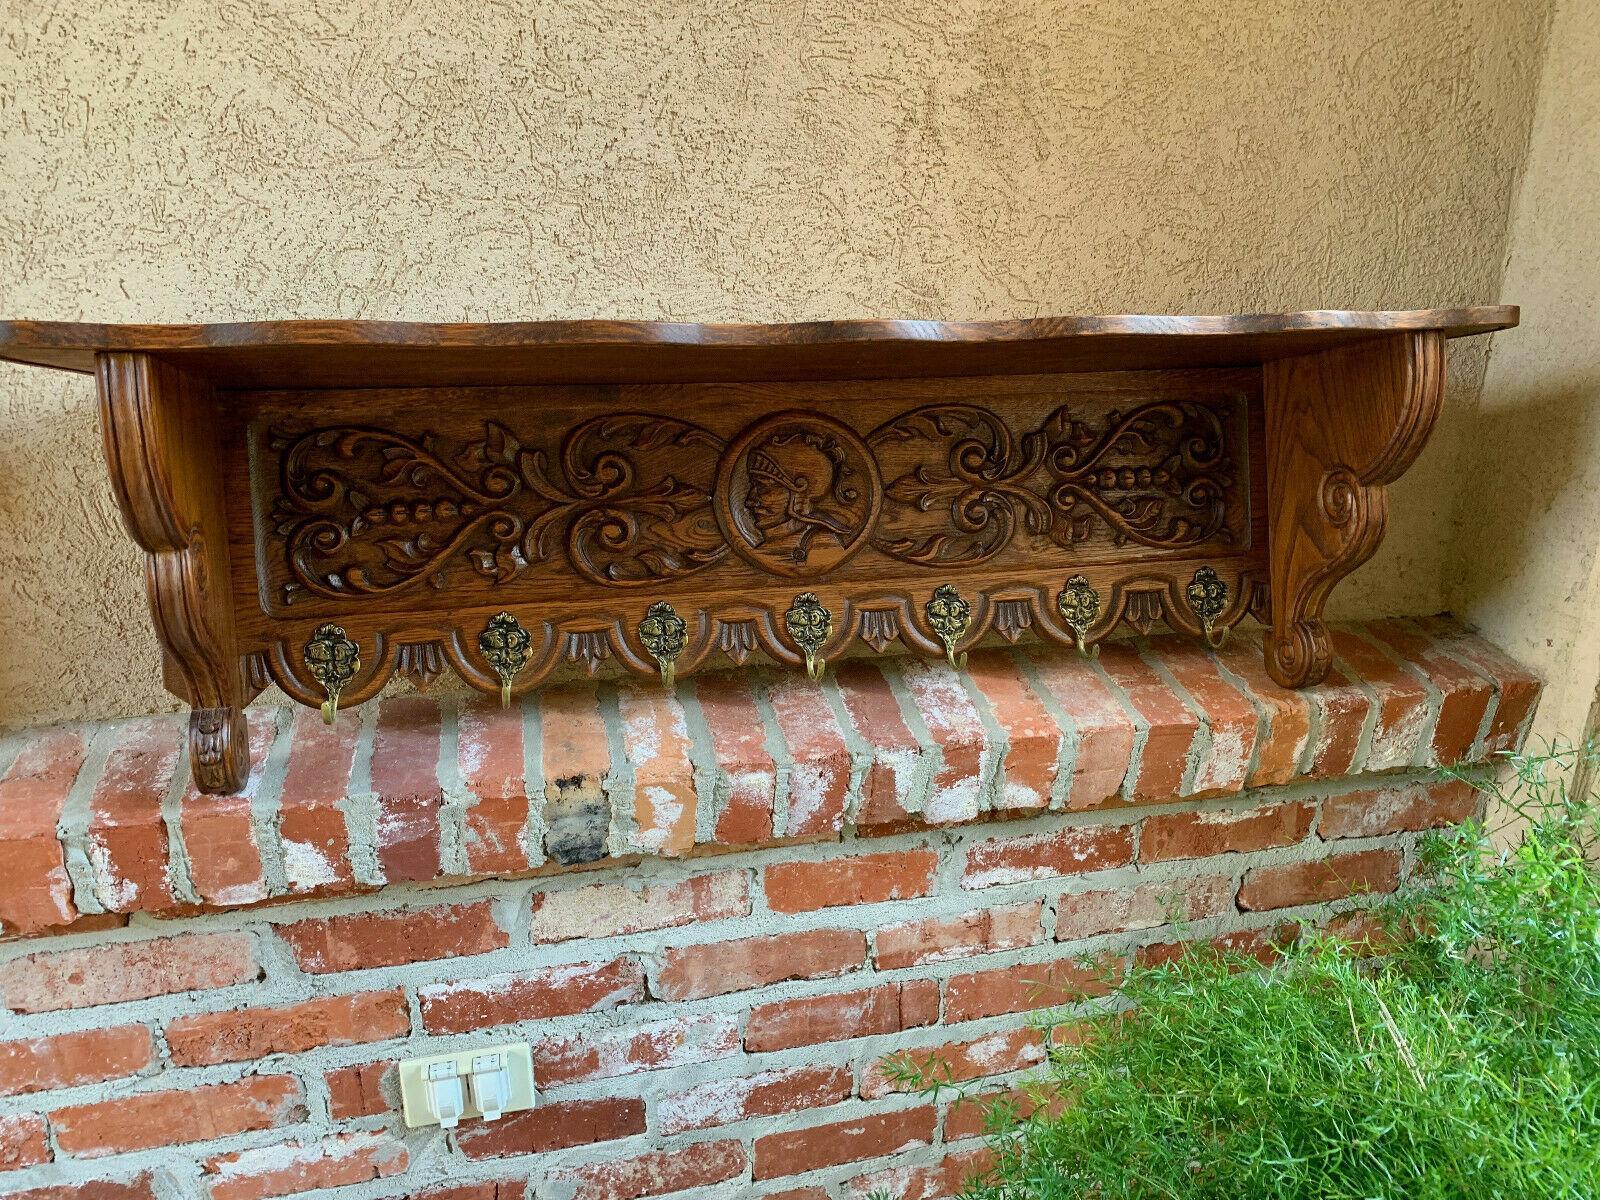 ~Direct from France~
Another lovely antique wall shelf, this one having beautiful oak grain and a large carved center panel!
~Carvings include a center medallion with a warrior figurehead surrounded by ornate scrolls and filigree~
~Seven brass